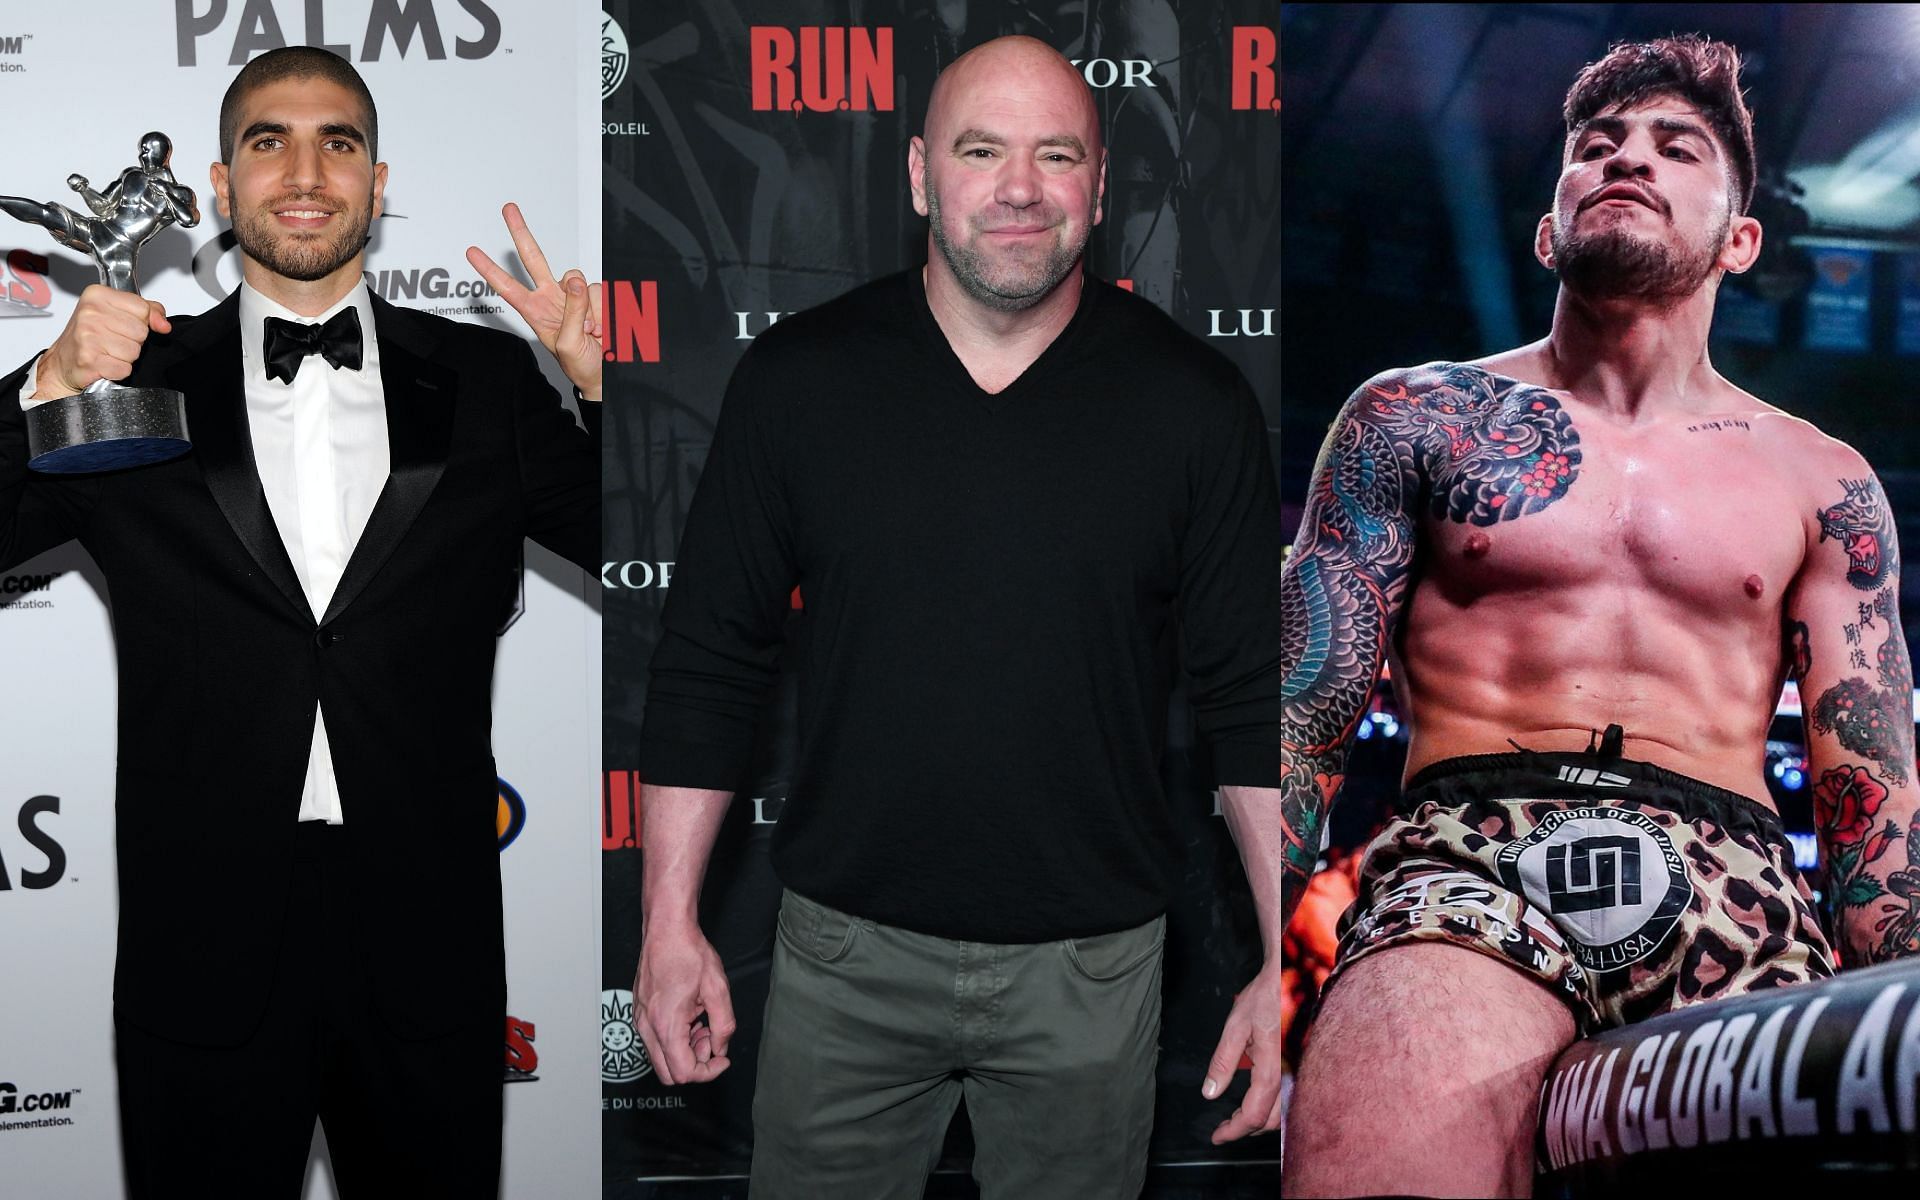 From the left to right- Ariel Helwani, Dana White and Dillon Danis [Image Courtesy: Getty Images and @dillondanis on Instagram] 